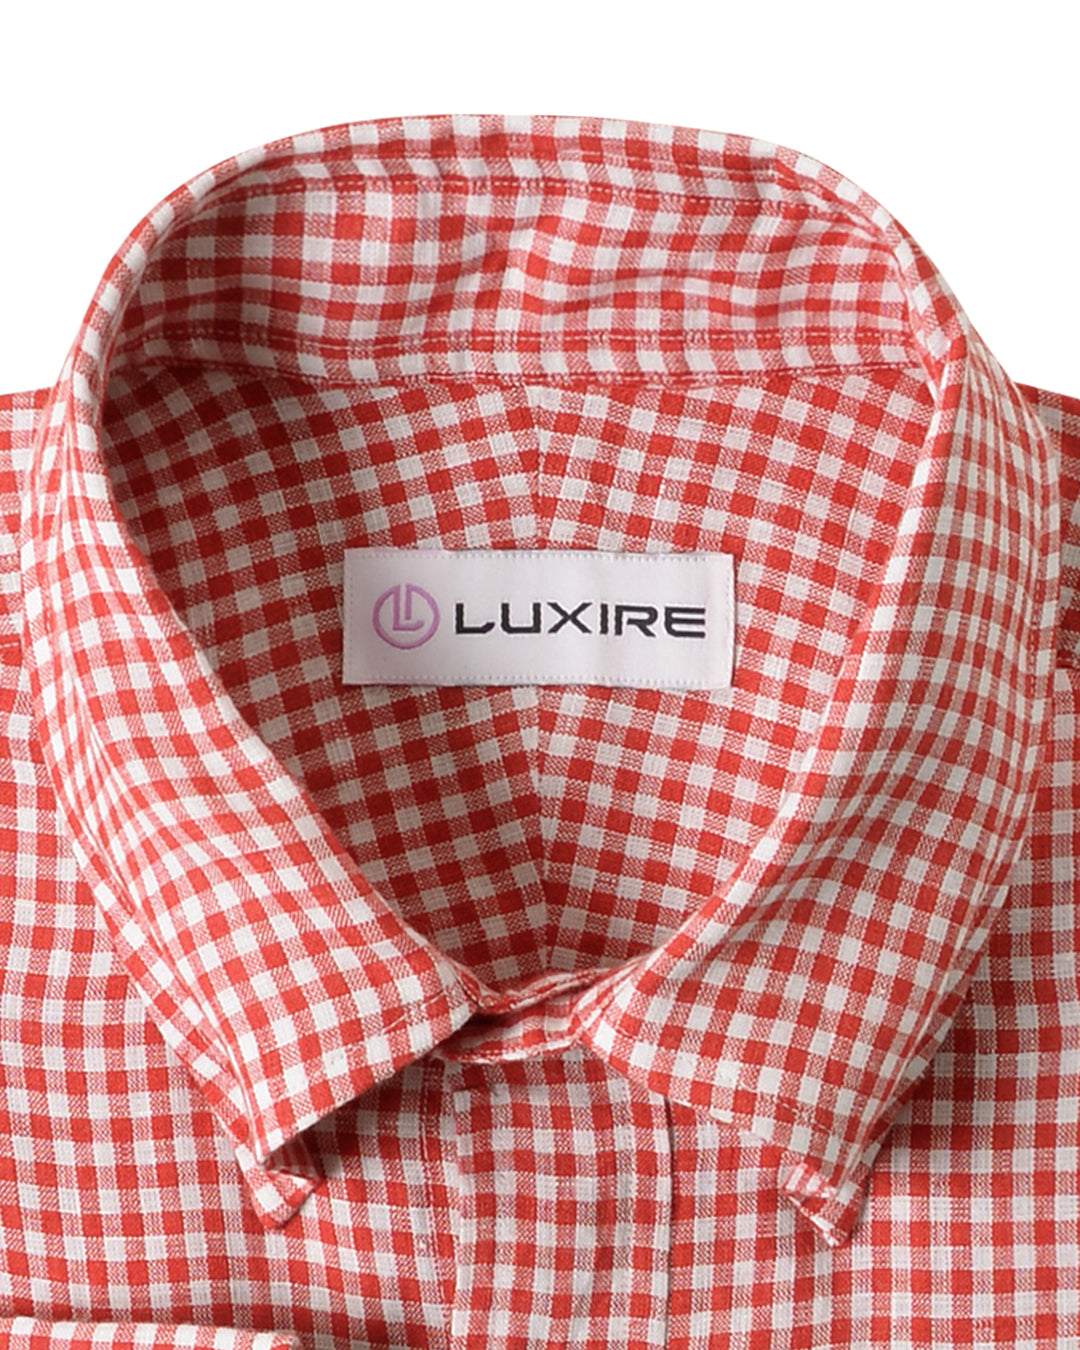 Collar of the custom linen shirt for men in red and white gingham checks by Luxire Clothing